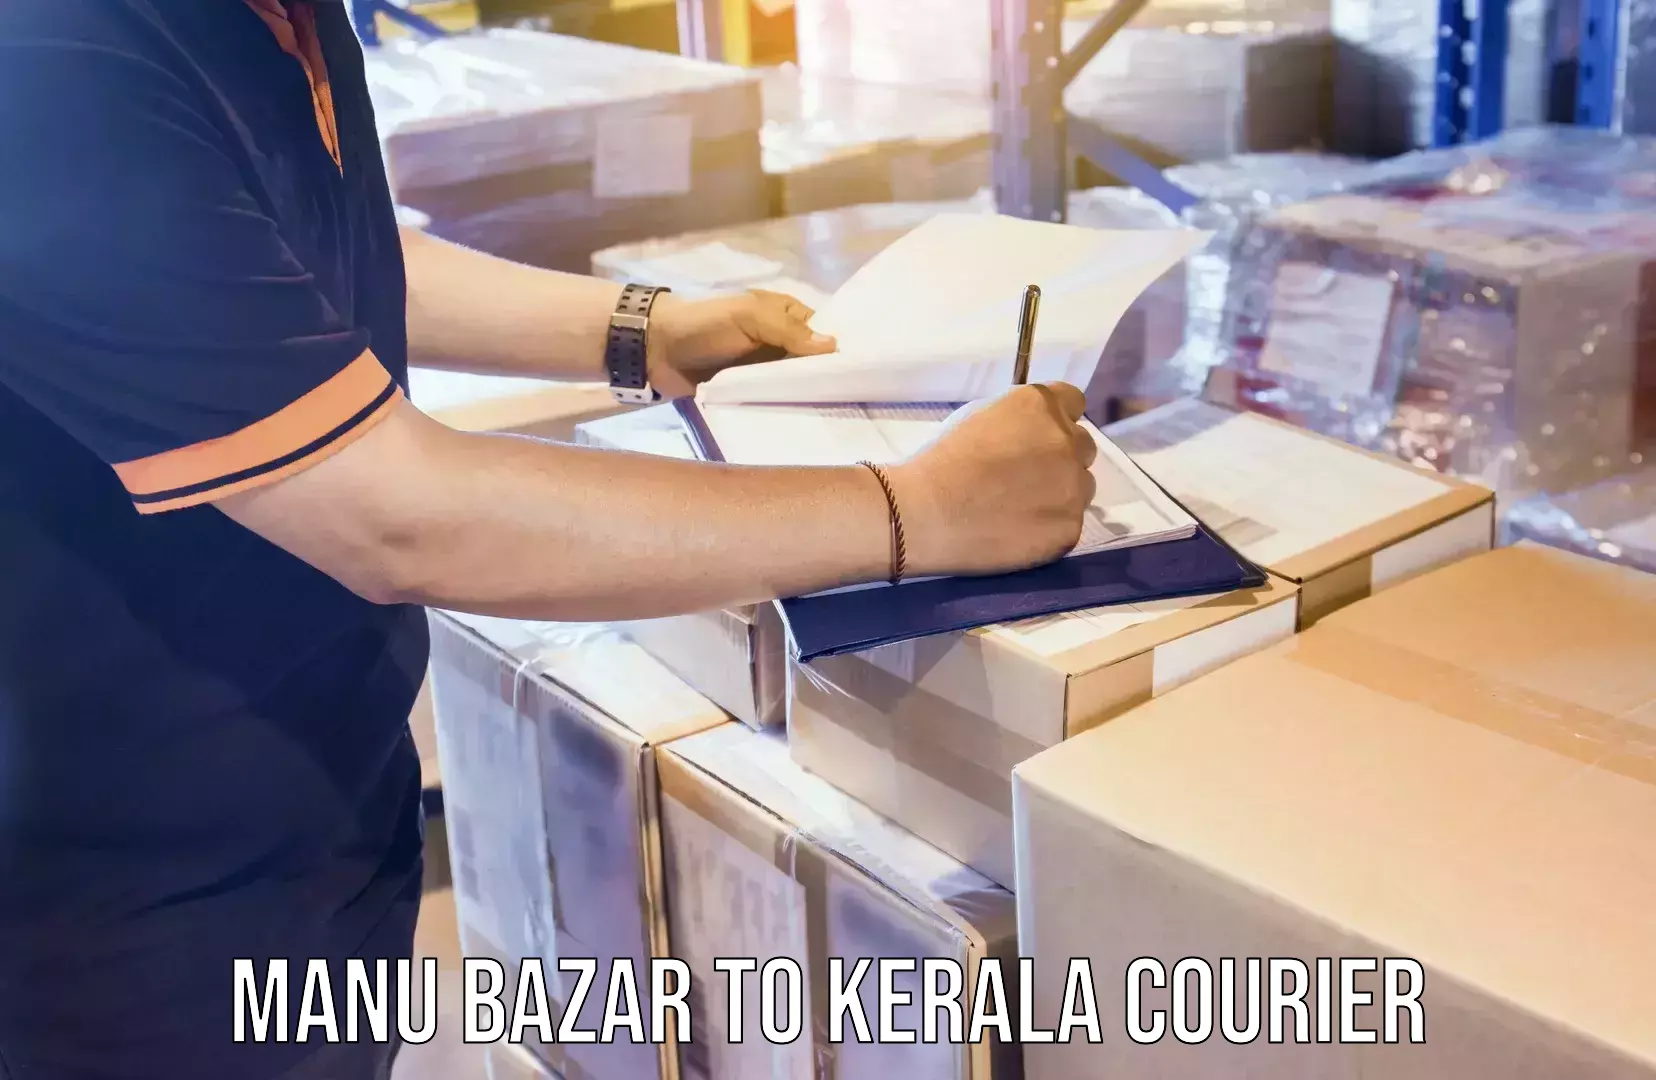 Next-day delivery options Manu Bazar to Kerala